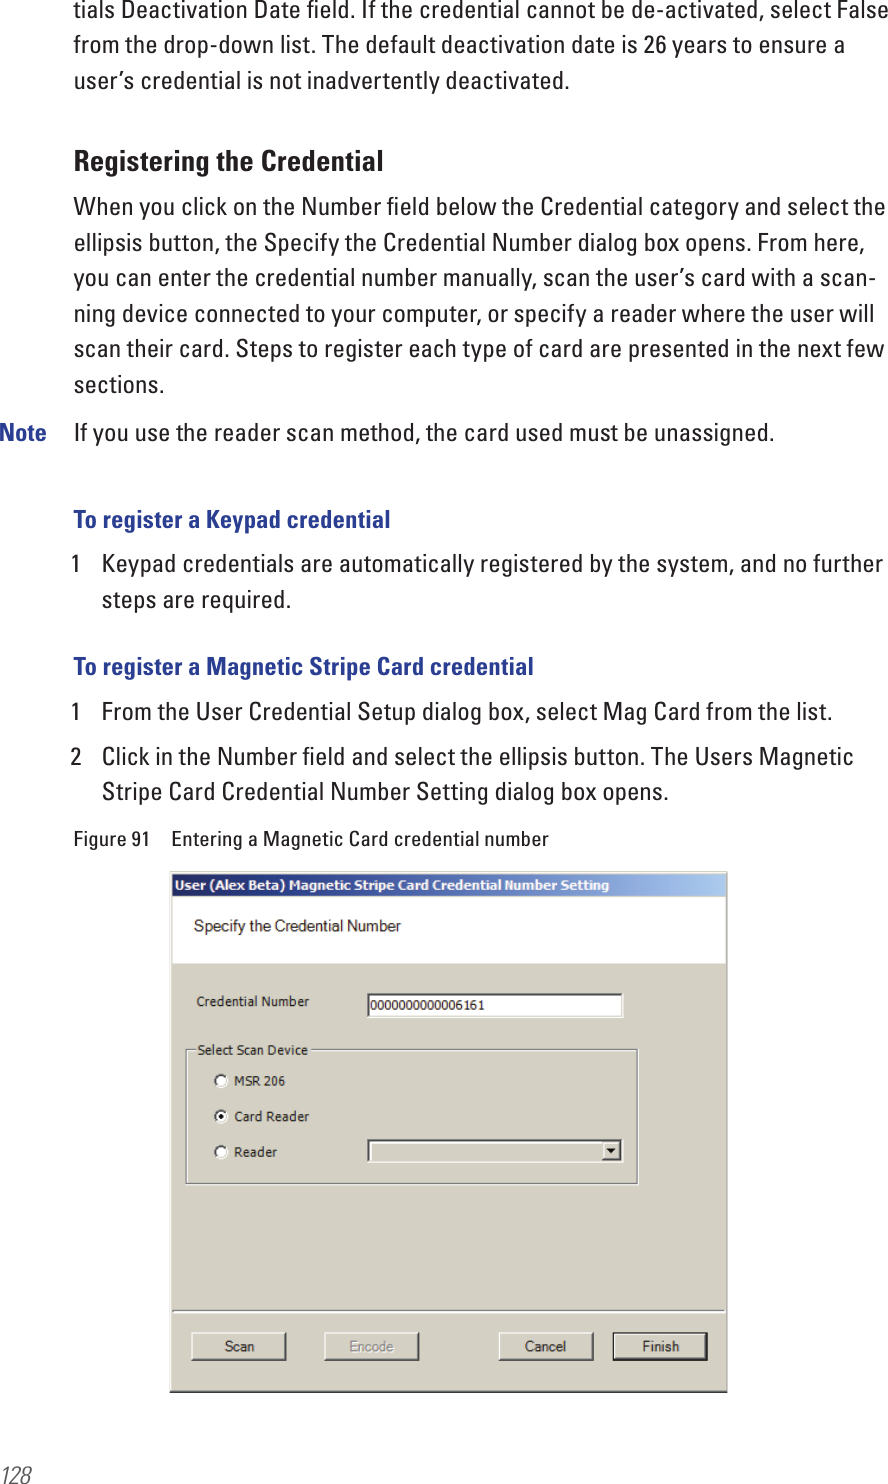 128tials Deactivation Date ﬁeld. If the credential cannot be de-activated, select False from the drop-down list. The default deactivation date is 26 years to ensure a user’s credential is not inadvertently deactivated. Registering the CredentialWhen you click on the Number ﬁeld below the Credential category and select the ellipsis button, the Specify the Credential Number dialog box opens. From here, you can enter the credential number manually, scan the user’s card with a scan-ning device connected to your computer, or specify a reader where the user will scan their card. Steps to register each type of card are presented in the next few sections.Note  If you use the reader scan method, the card used must be unassigned. To register a Keypad credential1  Keypad credentials are automatically registered by the system, and no further steps are required.To register a Magnetic Stripe Card credential1  From the User Credential Setup dialog box, select Mag Card from the list. 2  Click in the Number ﬁeld and select the ellipsis button. The Users Magnetic Stripe Card Credential Number Setting dialog box opens.Figure 91  Entering a Magnetic Card credential number